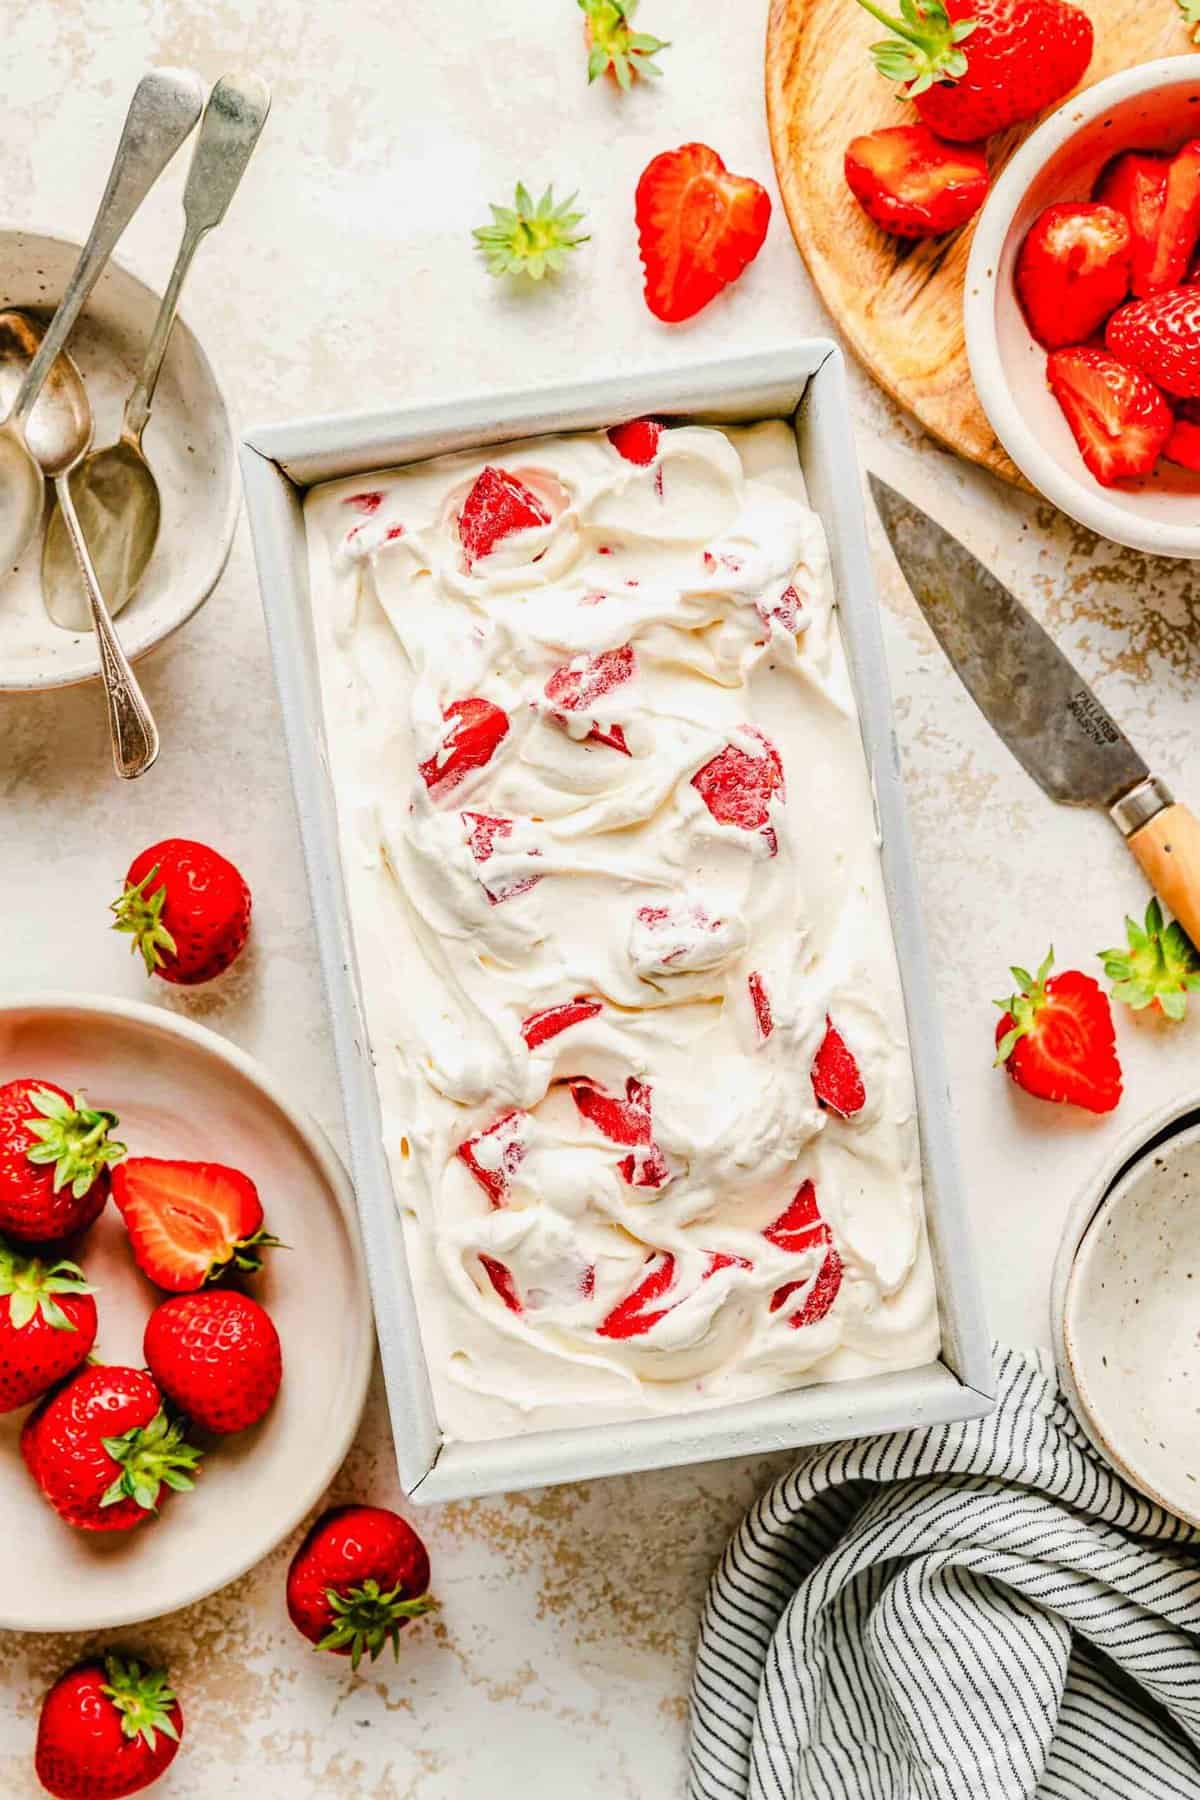 Homemade strawberry ice cream in a loaf pan surrounded by fresh strawberries.